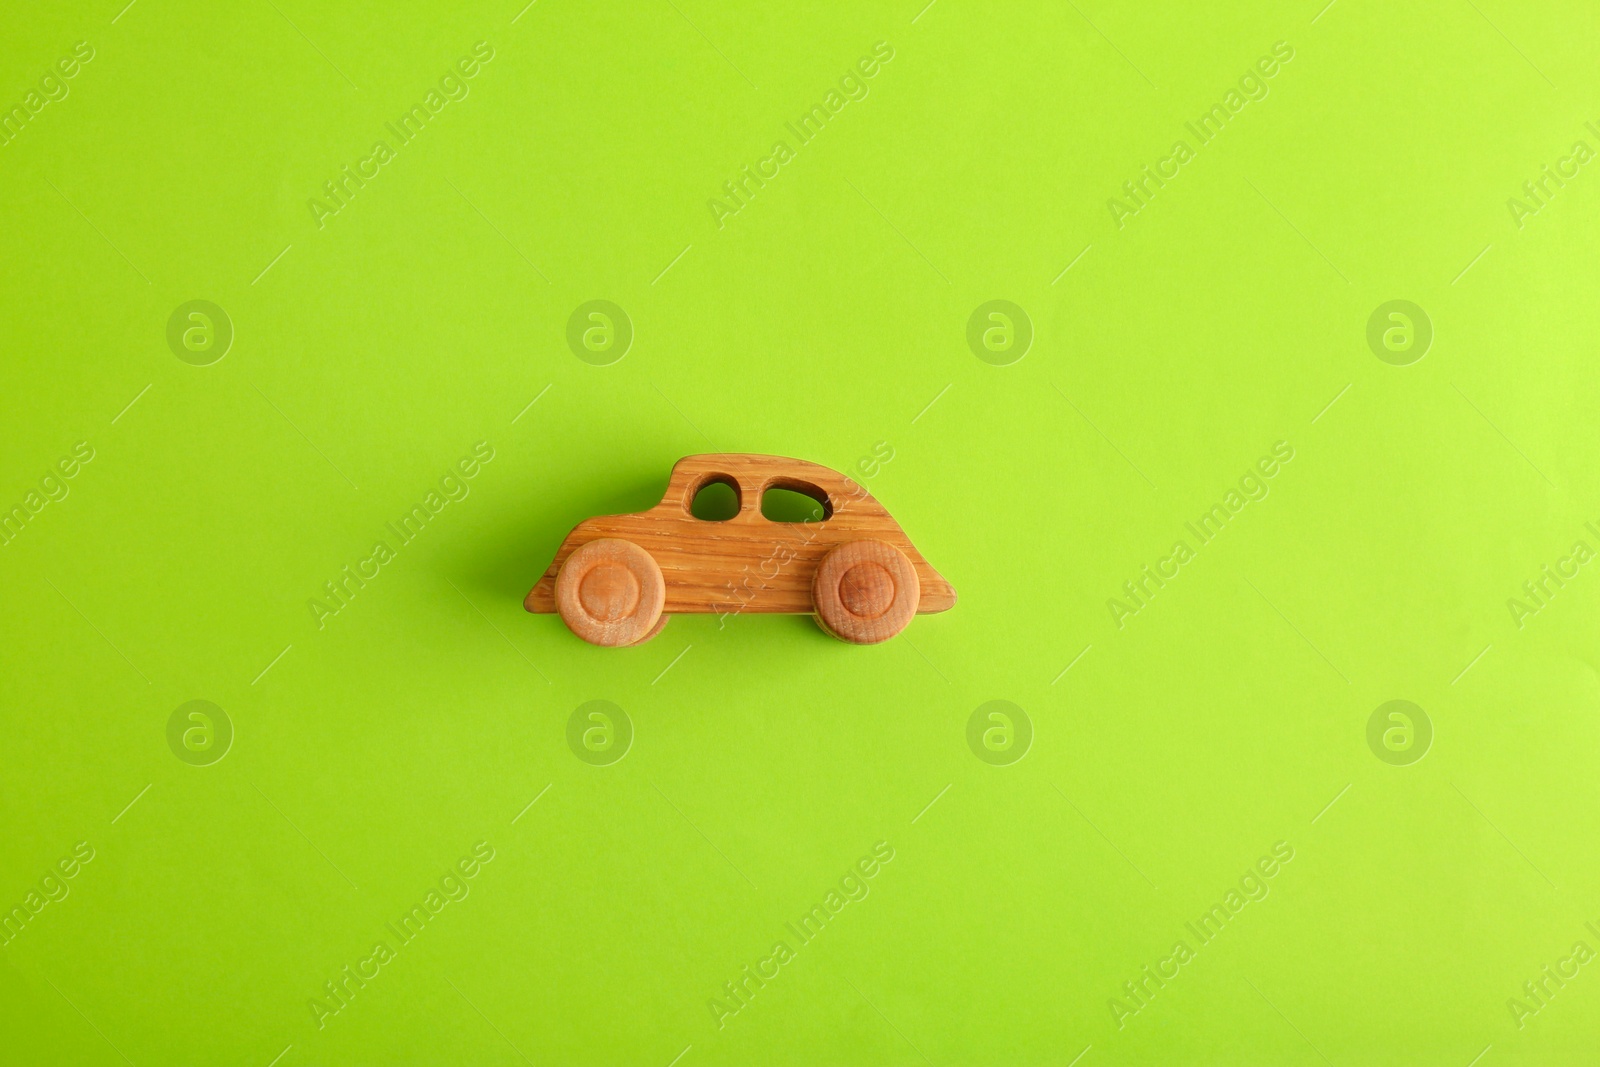 Photo of Wooden toy car on light green background, top view